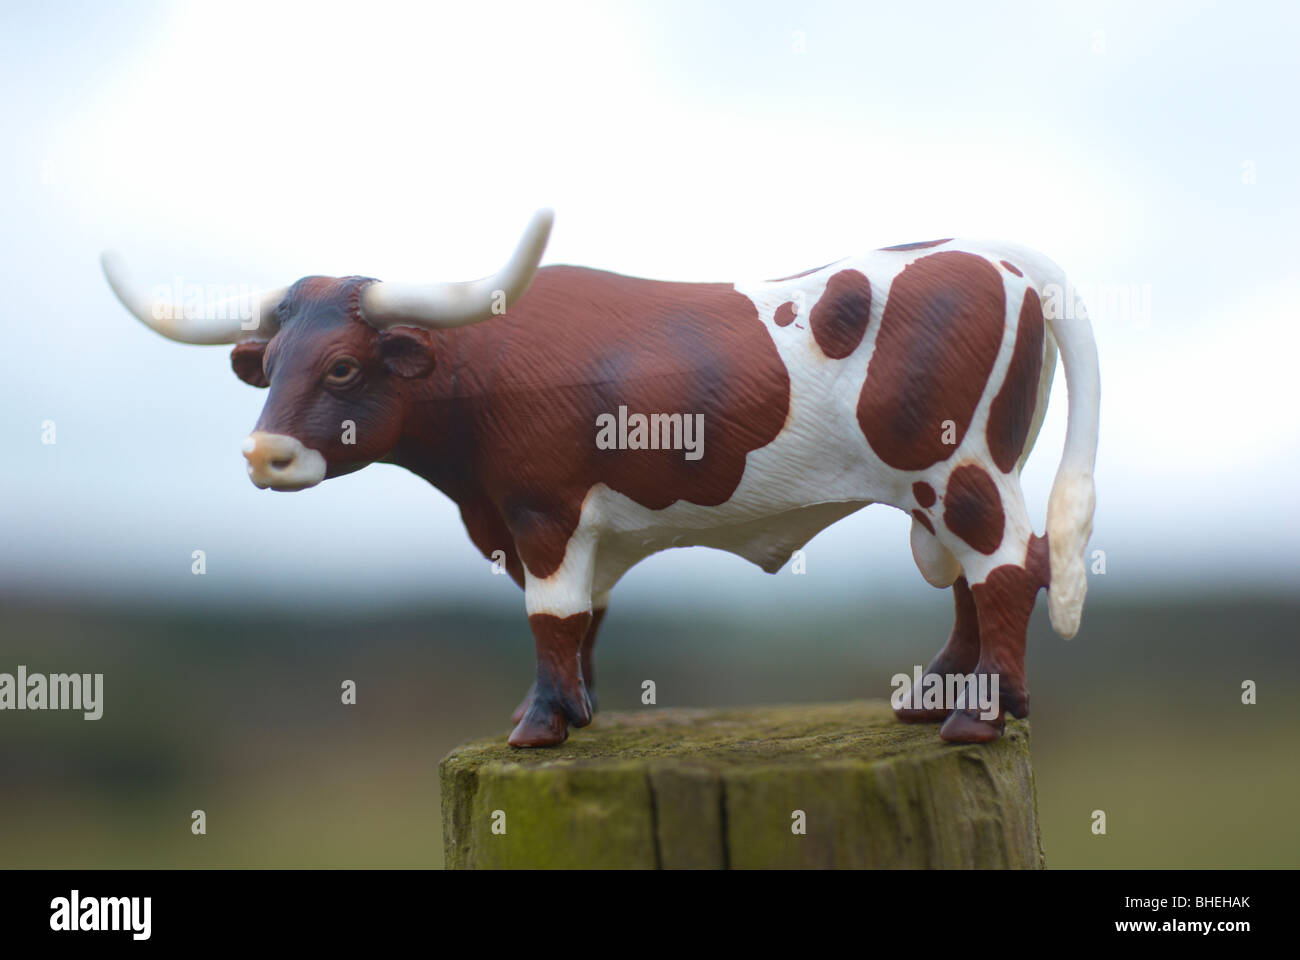 Texas longhorn plastic model cow photographed outside in a field. Stock Photo